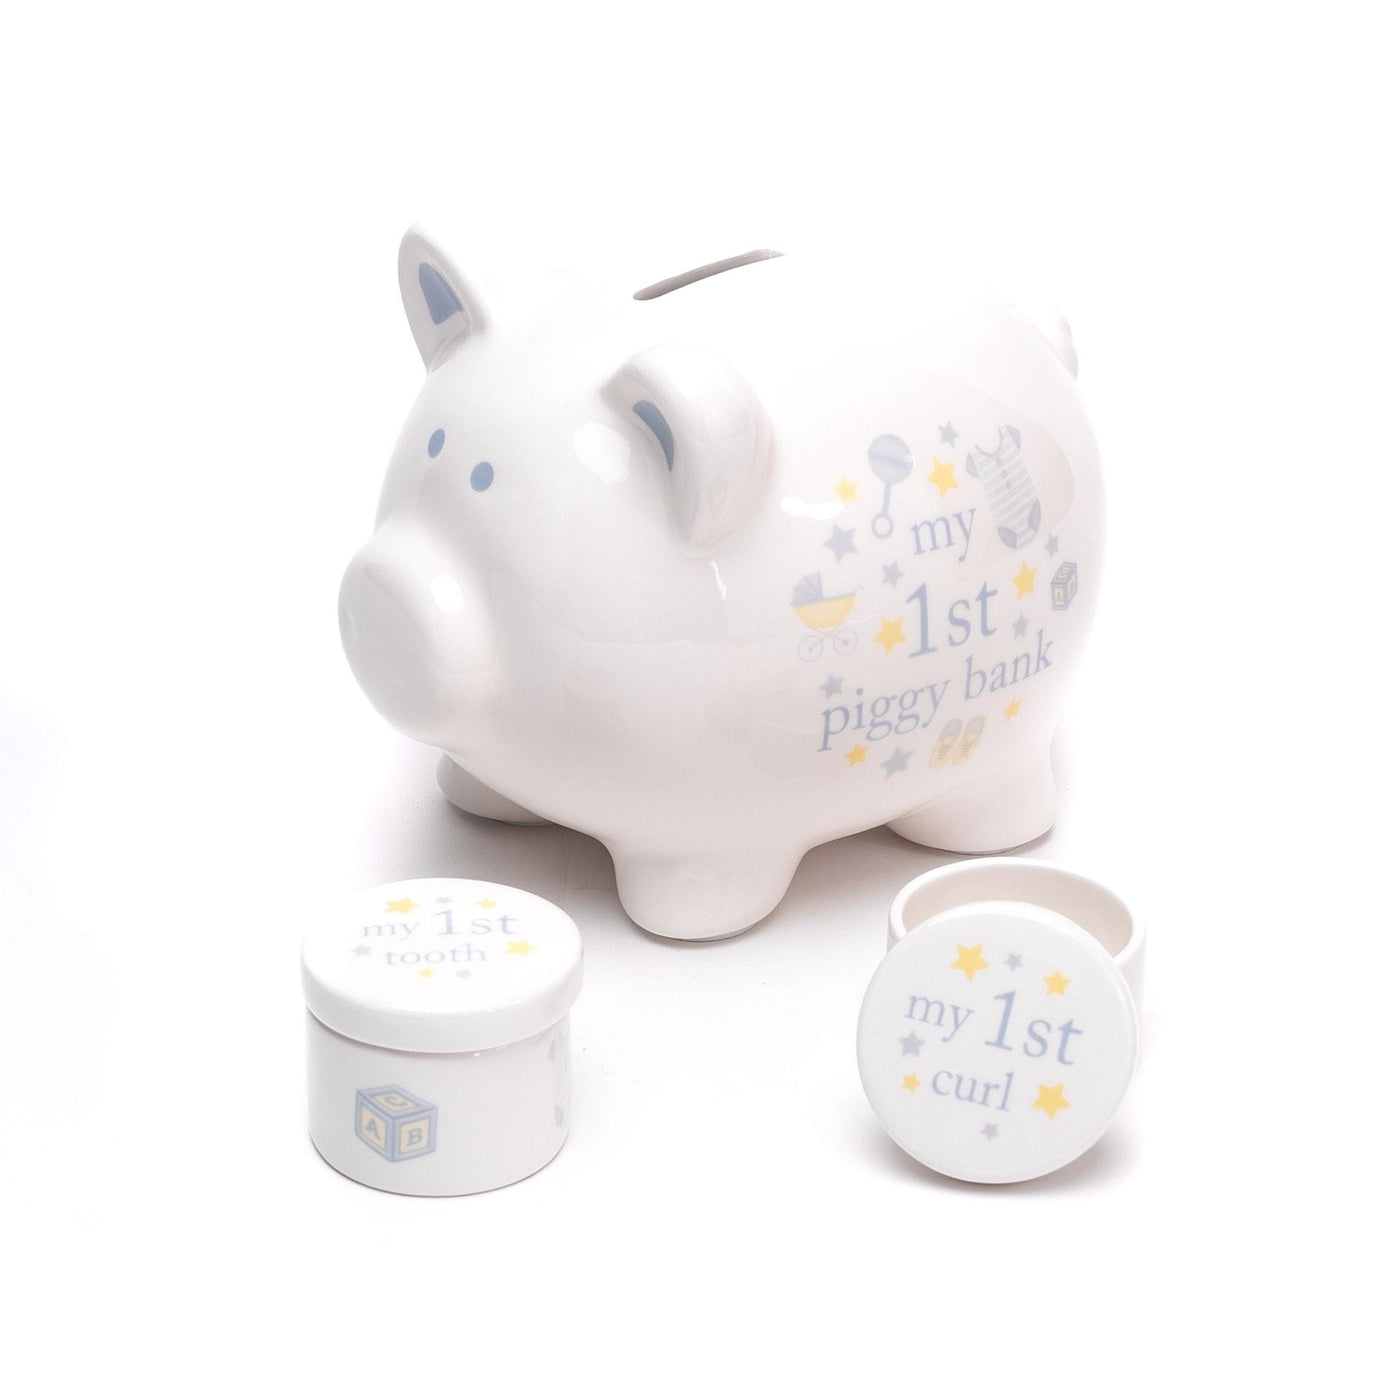 Widdop Gifts Money Boxes & Pots Ceramic Baby's Blue Piggy Bank, Tooth and Curl Gift Set